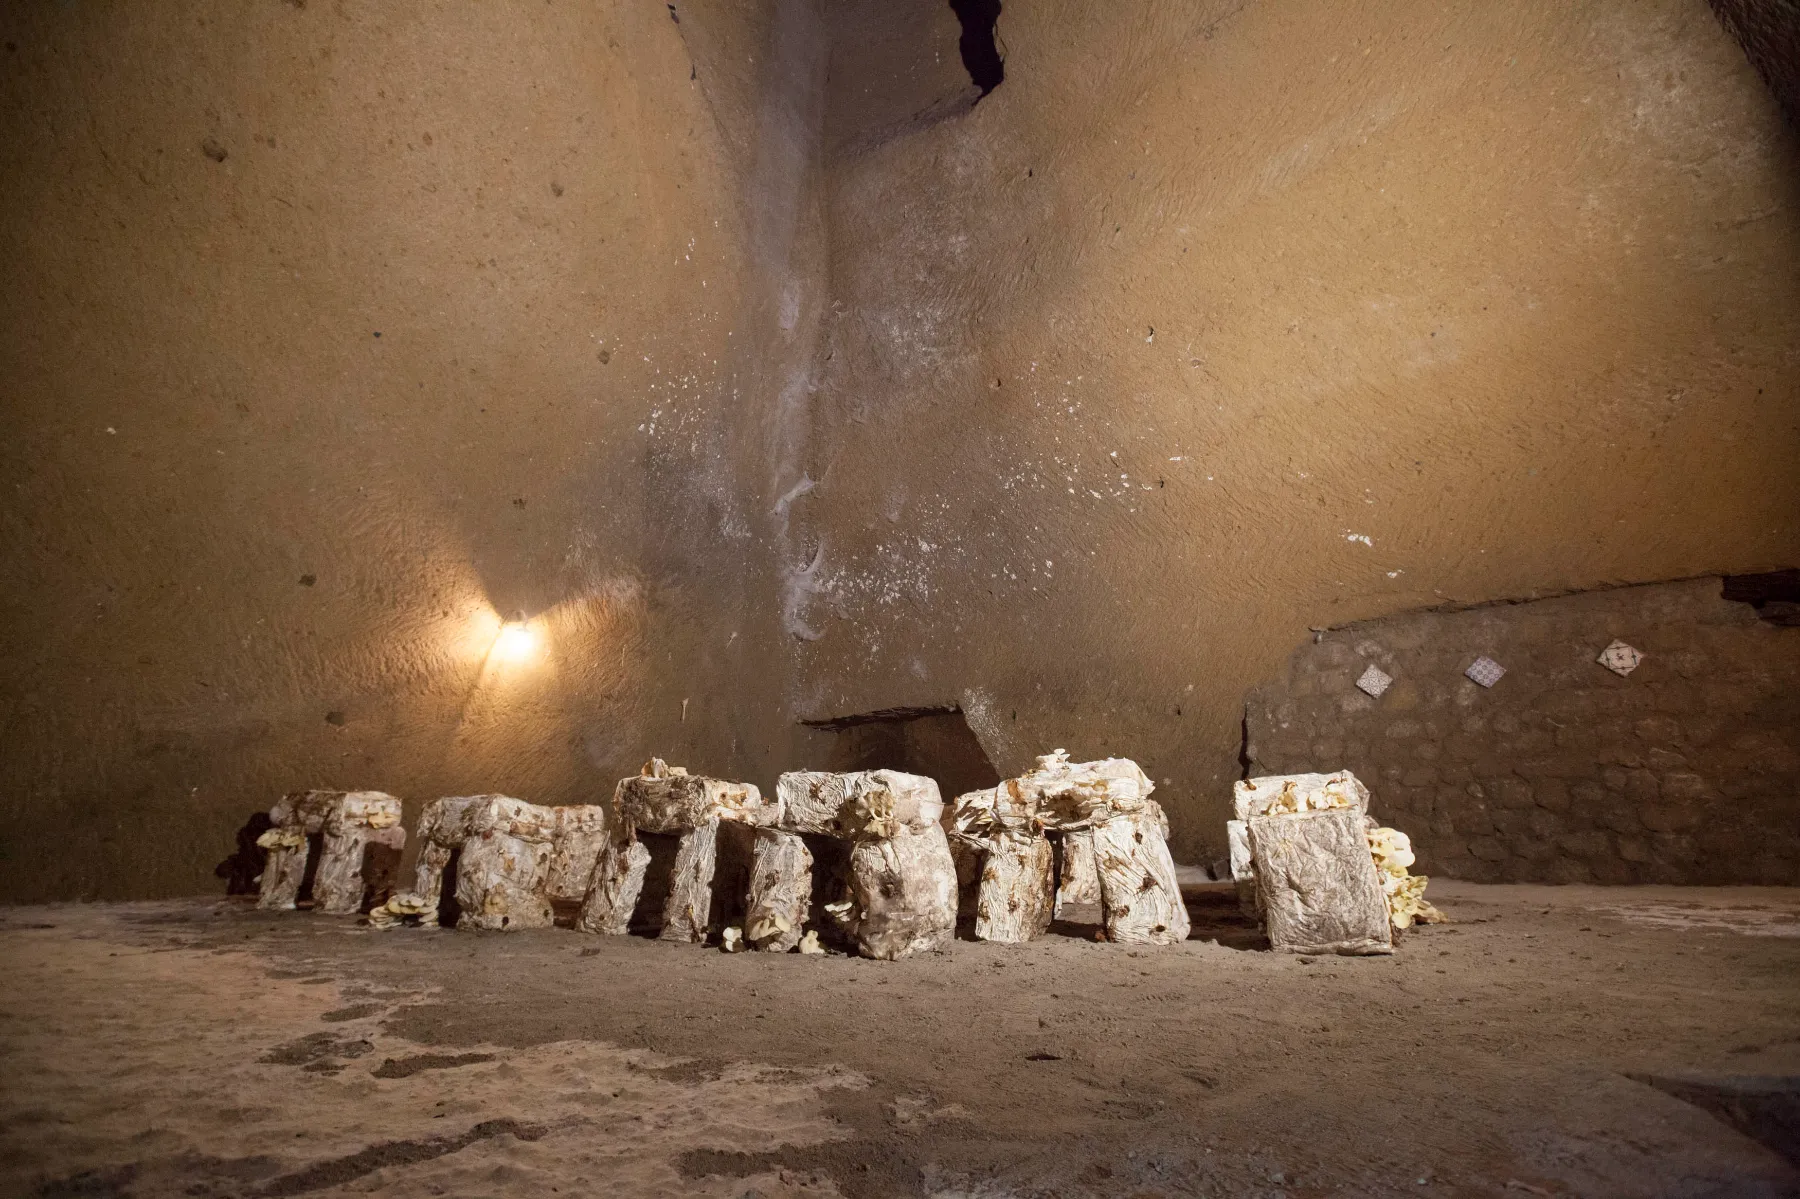 Experimental cultivation of mushrooms in a cave who hosts also the museum in a former WWII antiaircraft refuge made in ancient tuff quarry and roman water tanks. Naples, Italy.